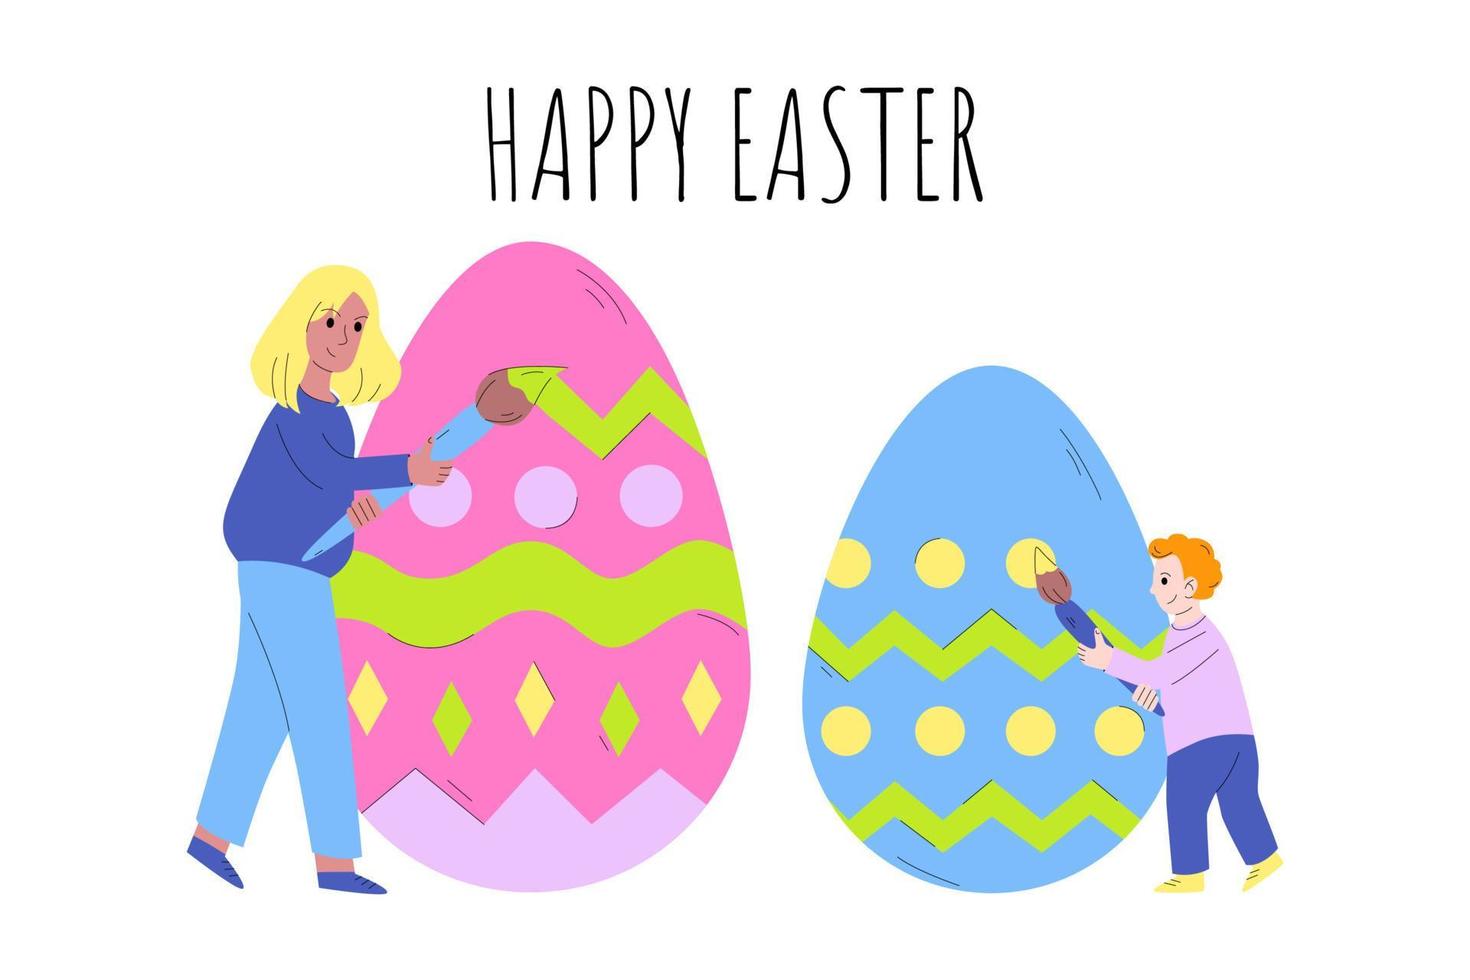 Tiny mother and son paint Easter eggs. Happy Easter. The concept of preparing for Easter, celebrating Easter with the whole family. Vector illustration in cartoon style.